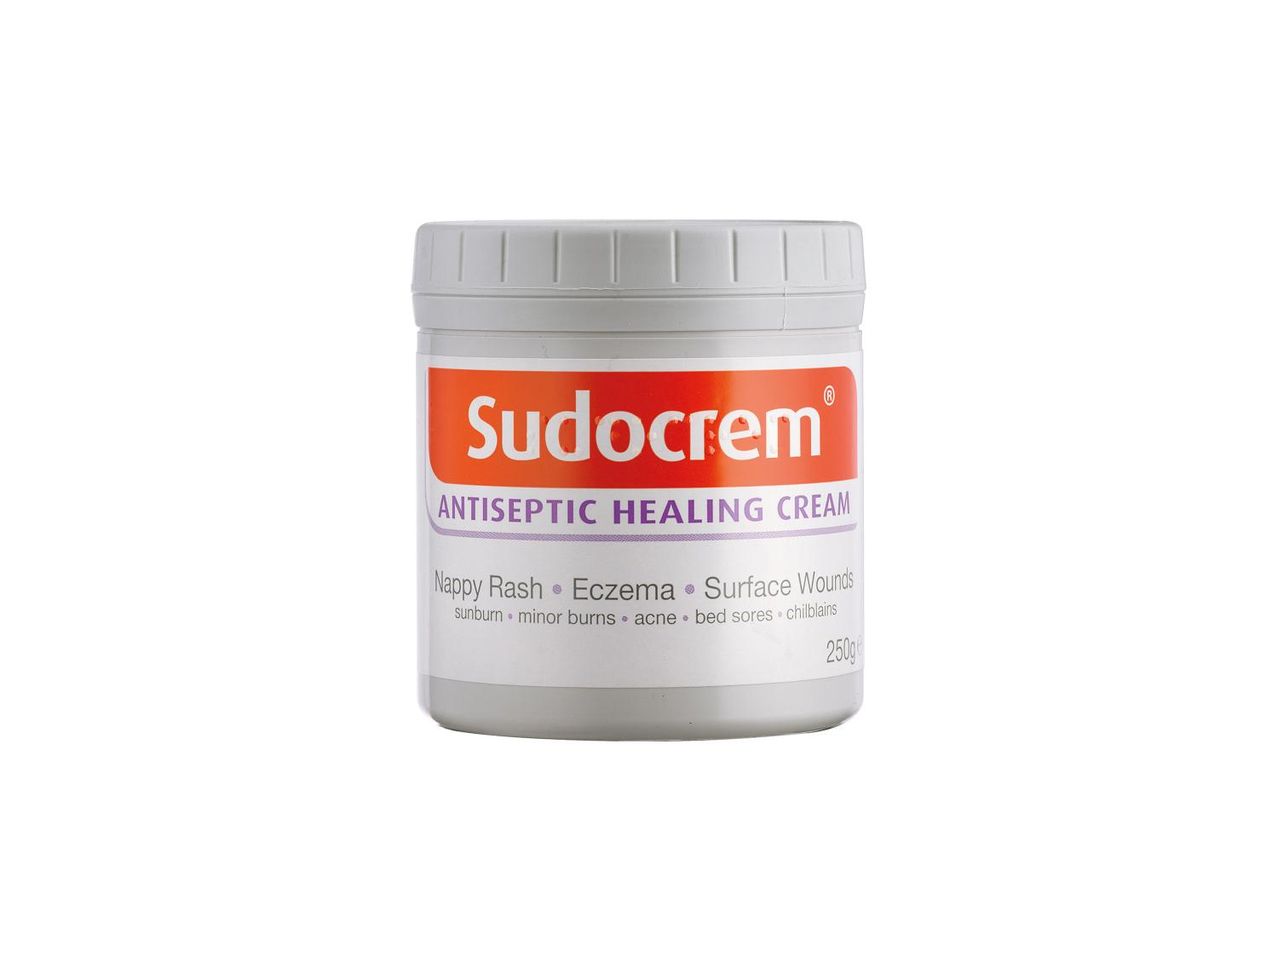 Go to full screen view: Sudocrem Antiseptic Healing Cream - Image 1